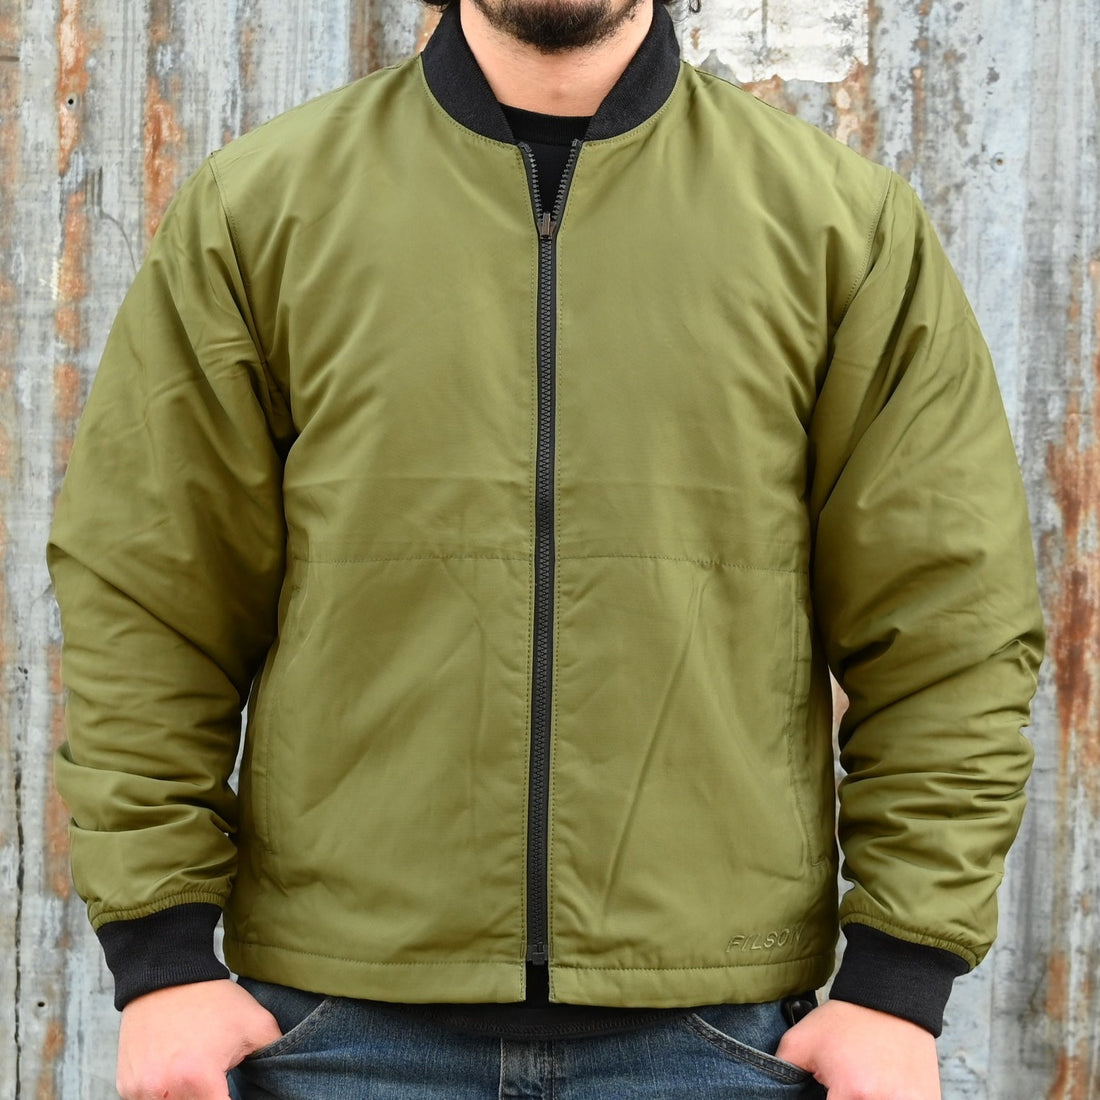 Filson Down Liner Jacket view of front on model size M